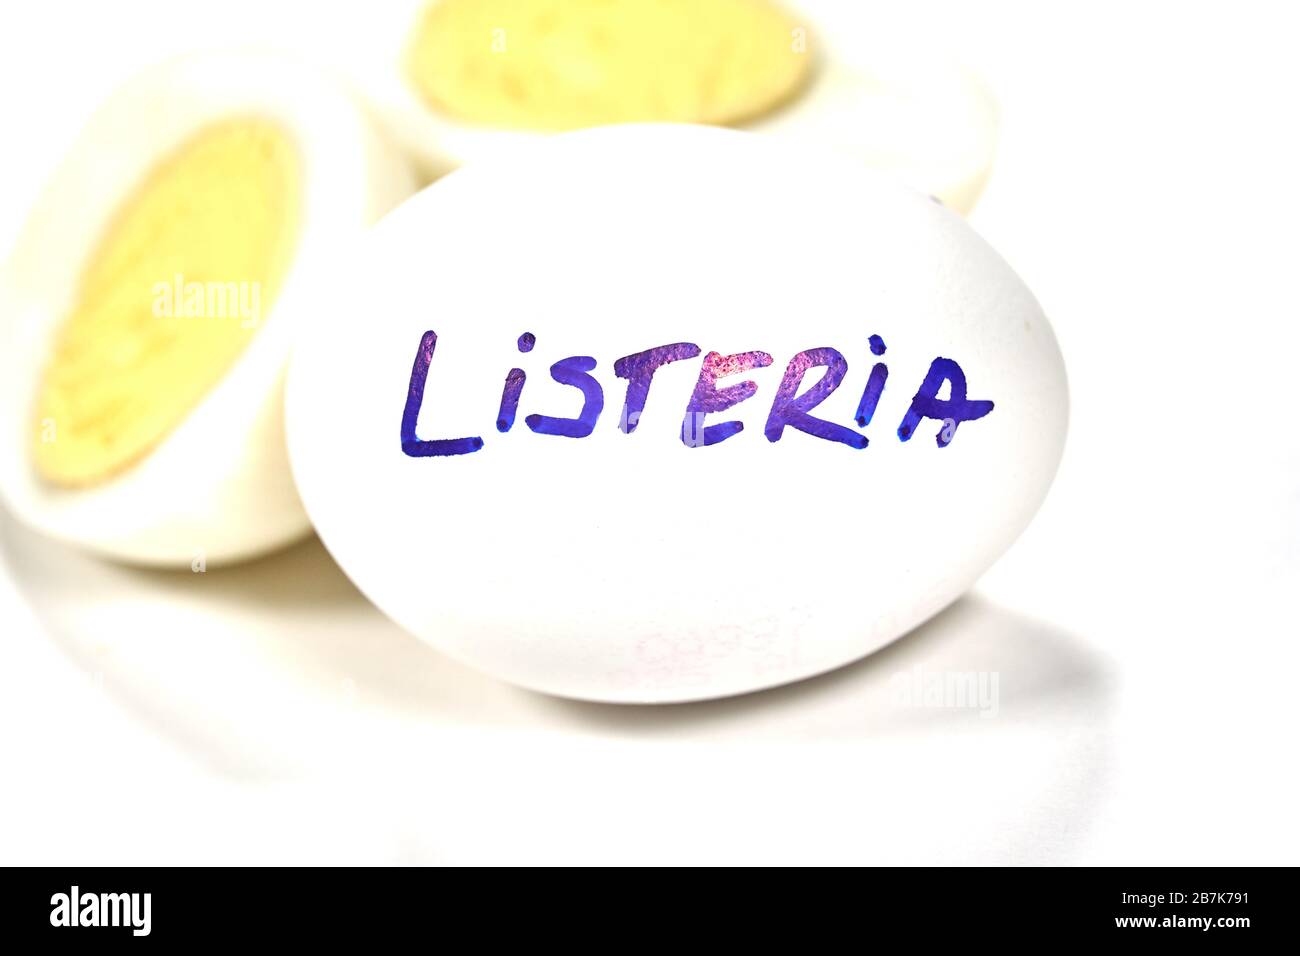 Hard boiled egg with Listeria writing on egg. Listeriosis is a food-borne infection caused by Listeria bacteria. Listeria is caused by bacteria that c Stock Photo